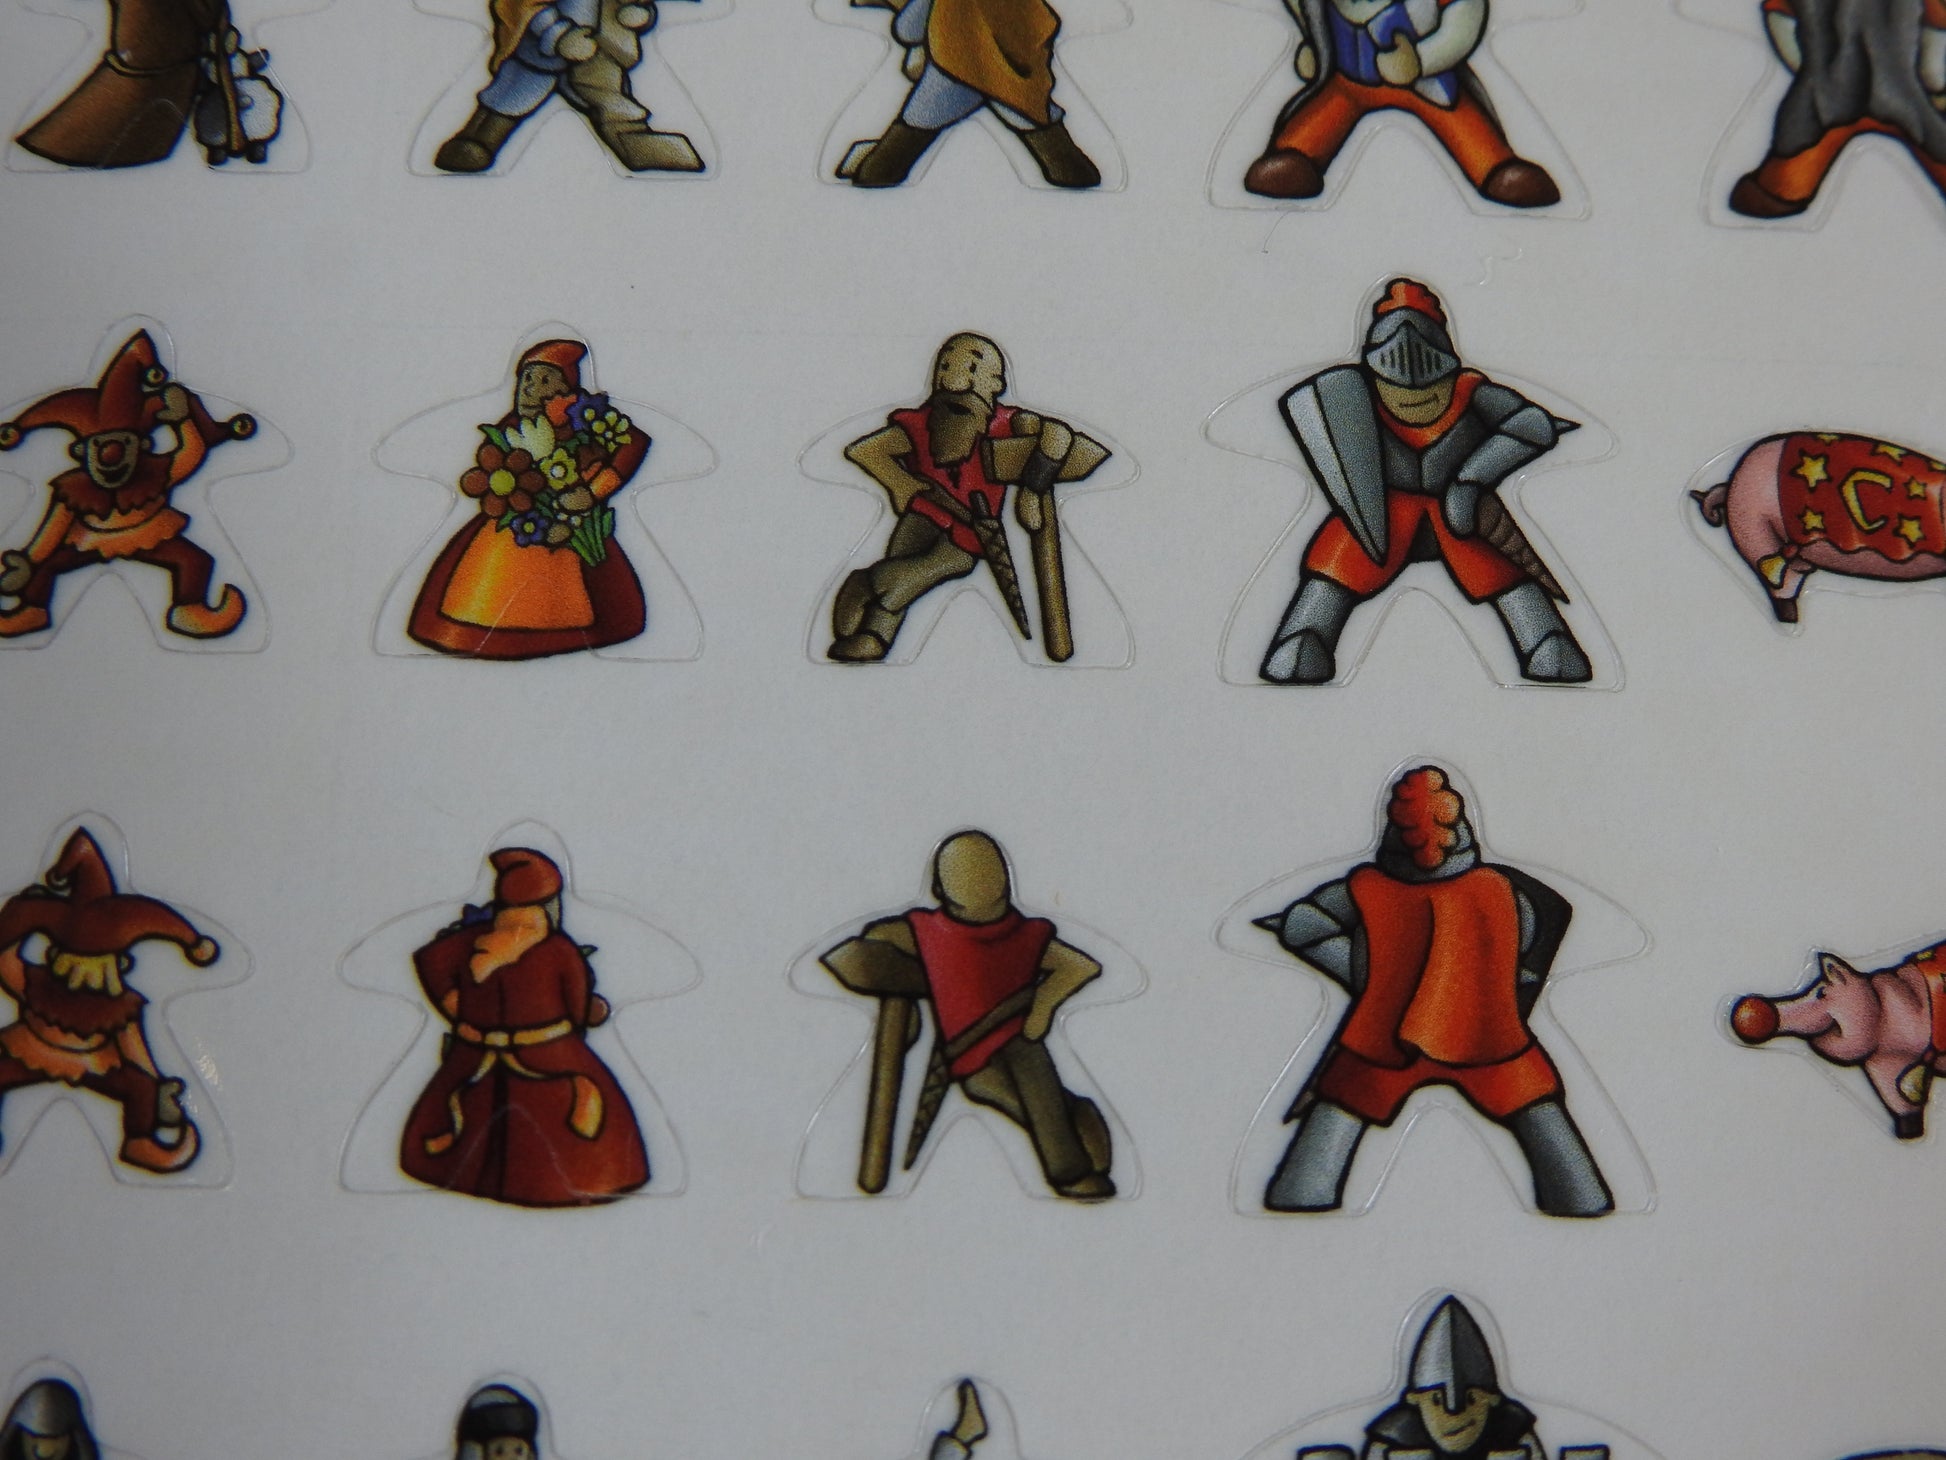 Close-up of two rows of Carcassonne meeple stickers, showing medieval knights and wizards.